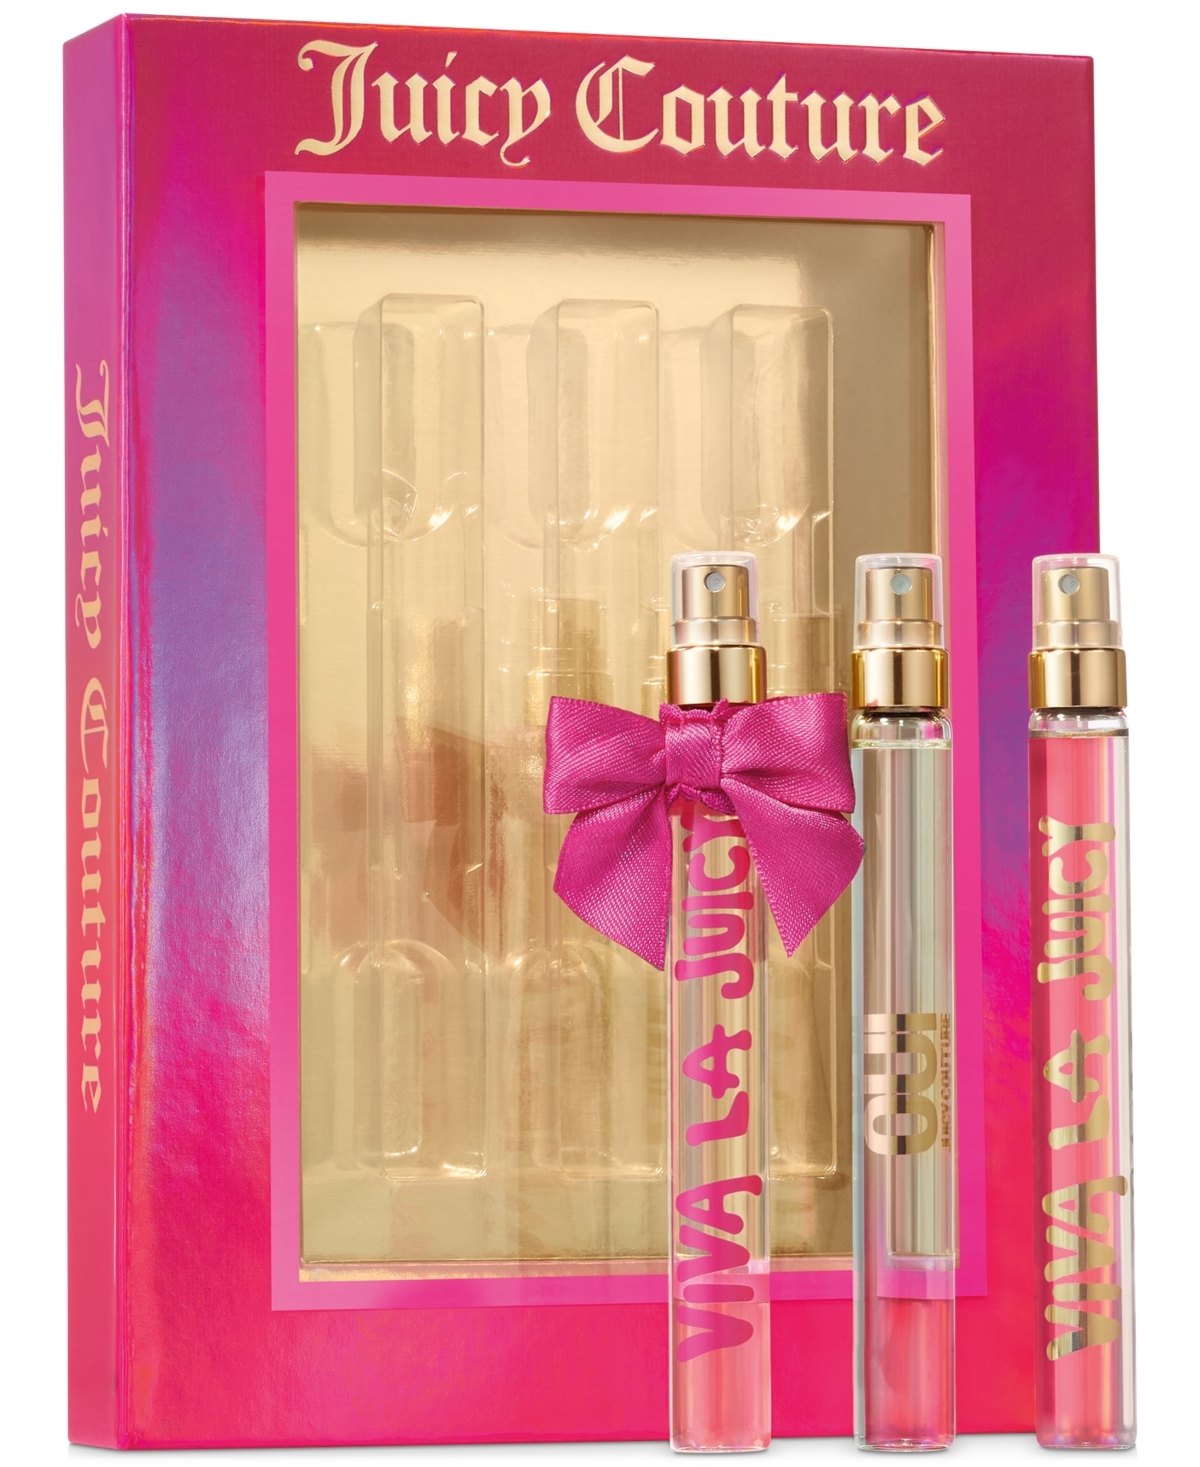 Juicy couture push up Bar.  Juicy couture, Couture, Juicy couture pink